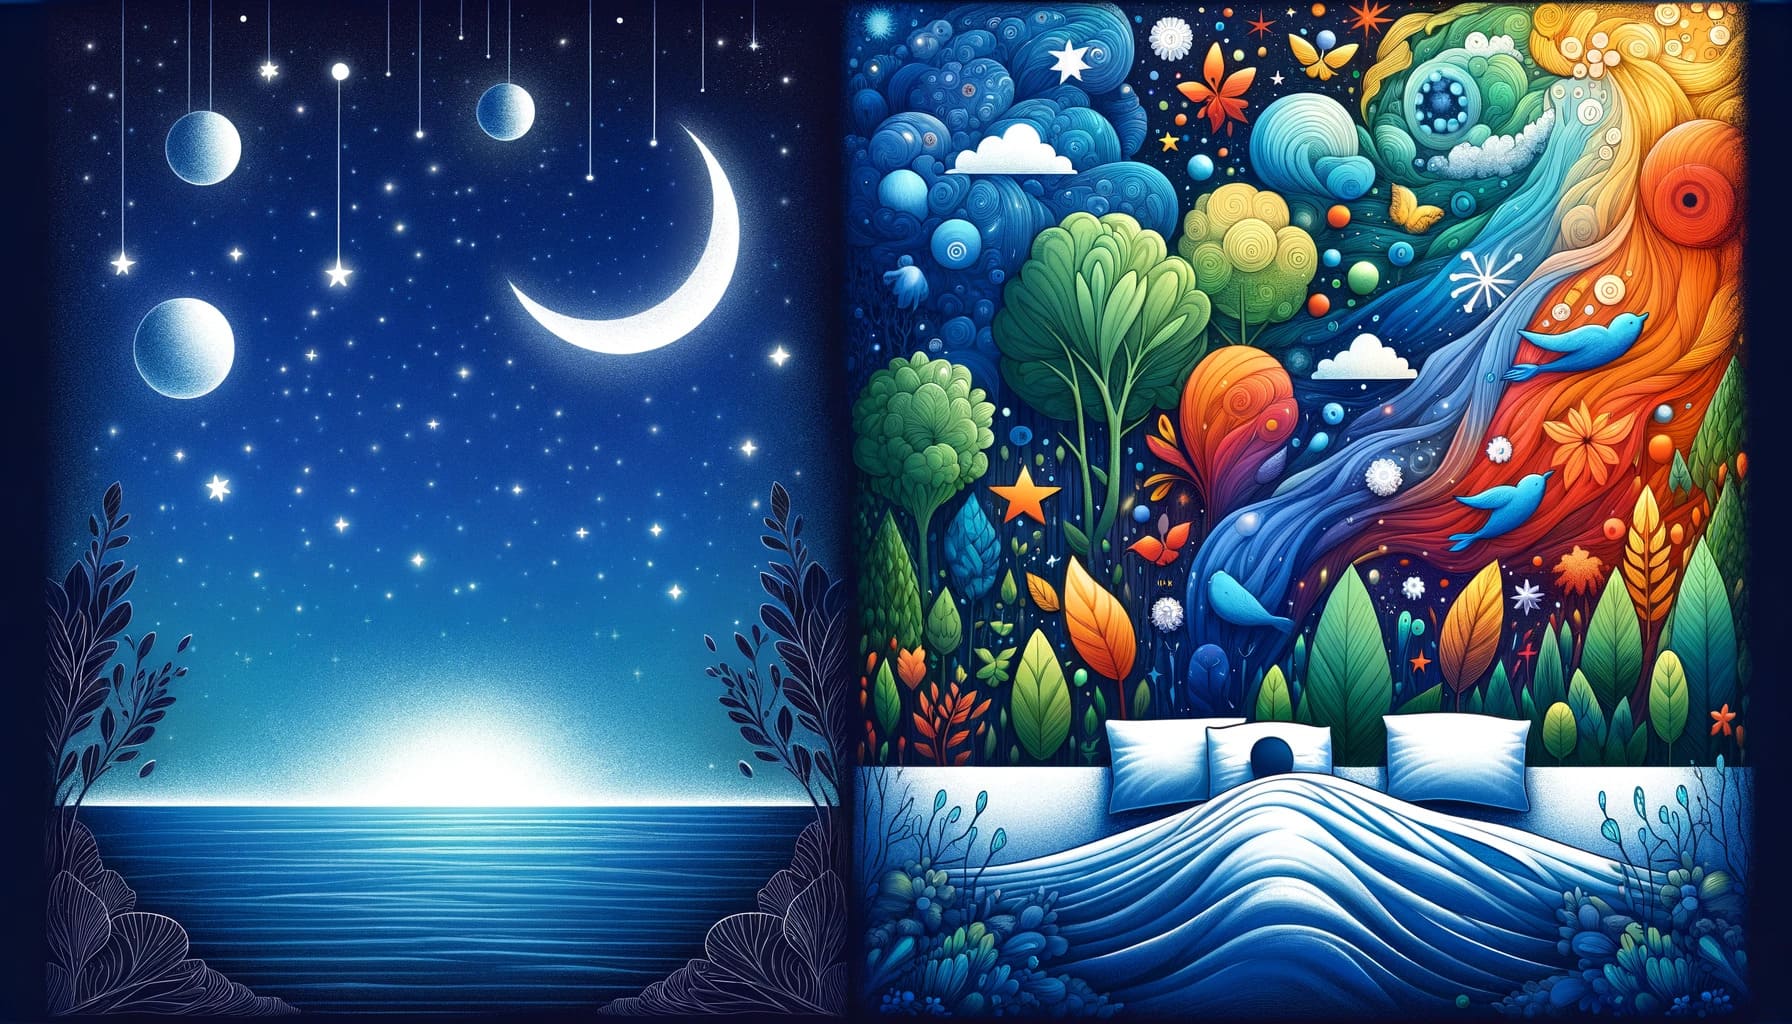 contrast between deep sleep and dream state featuring symbolic representations like a calm ocean under a starry night